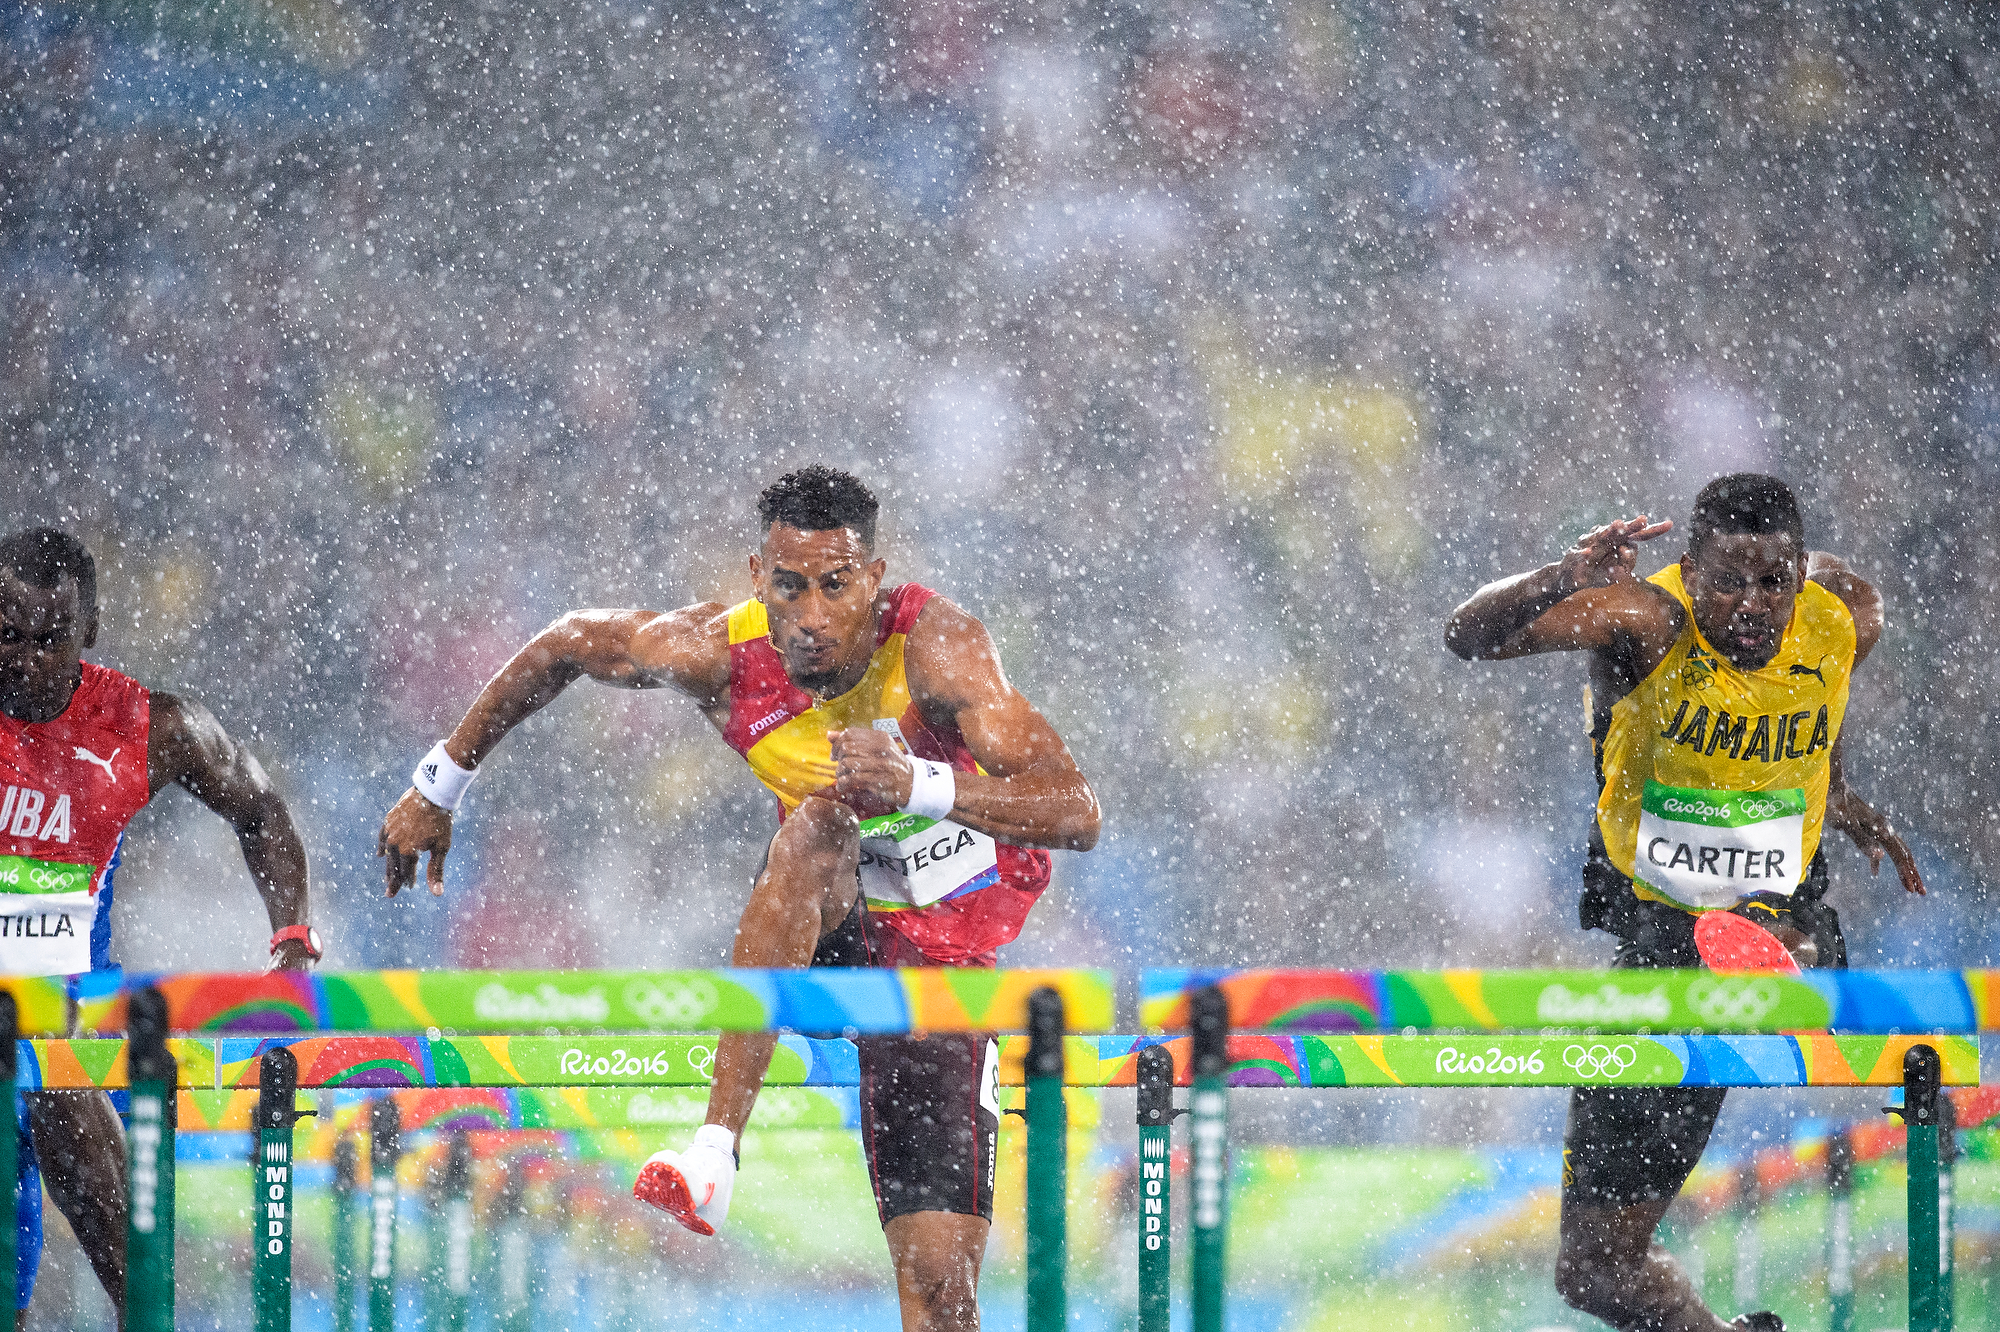 Photo of men's hurdle race in the rain during Rio 2016 Summer Olympics.